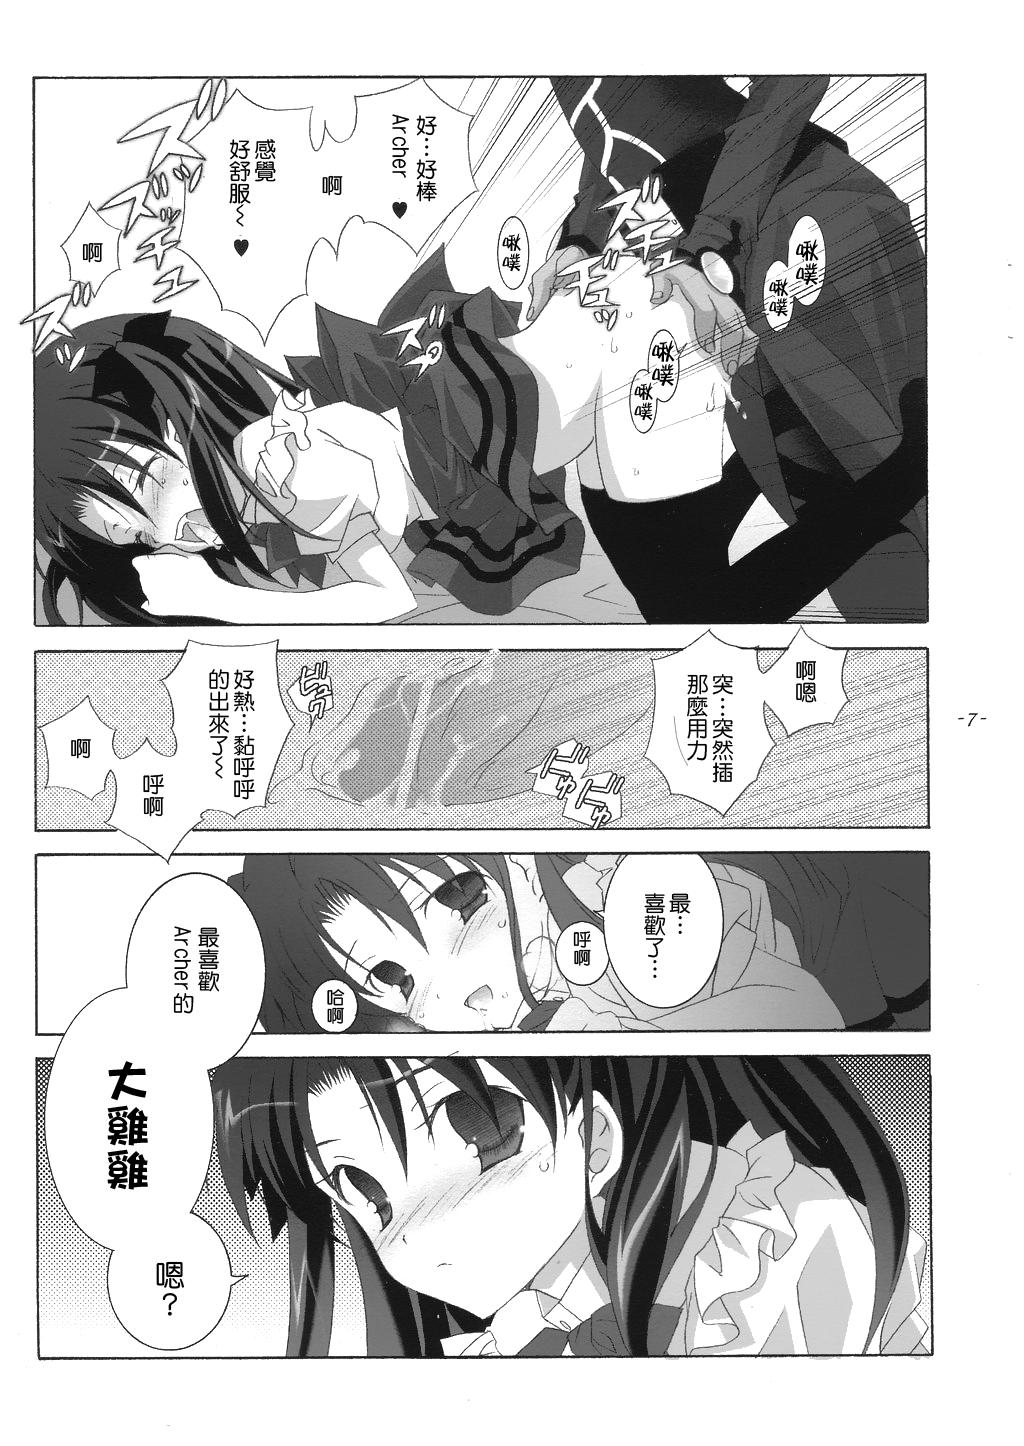 Officesex Cute Honey - Fate stay night Lovers - Page 6